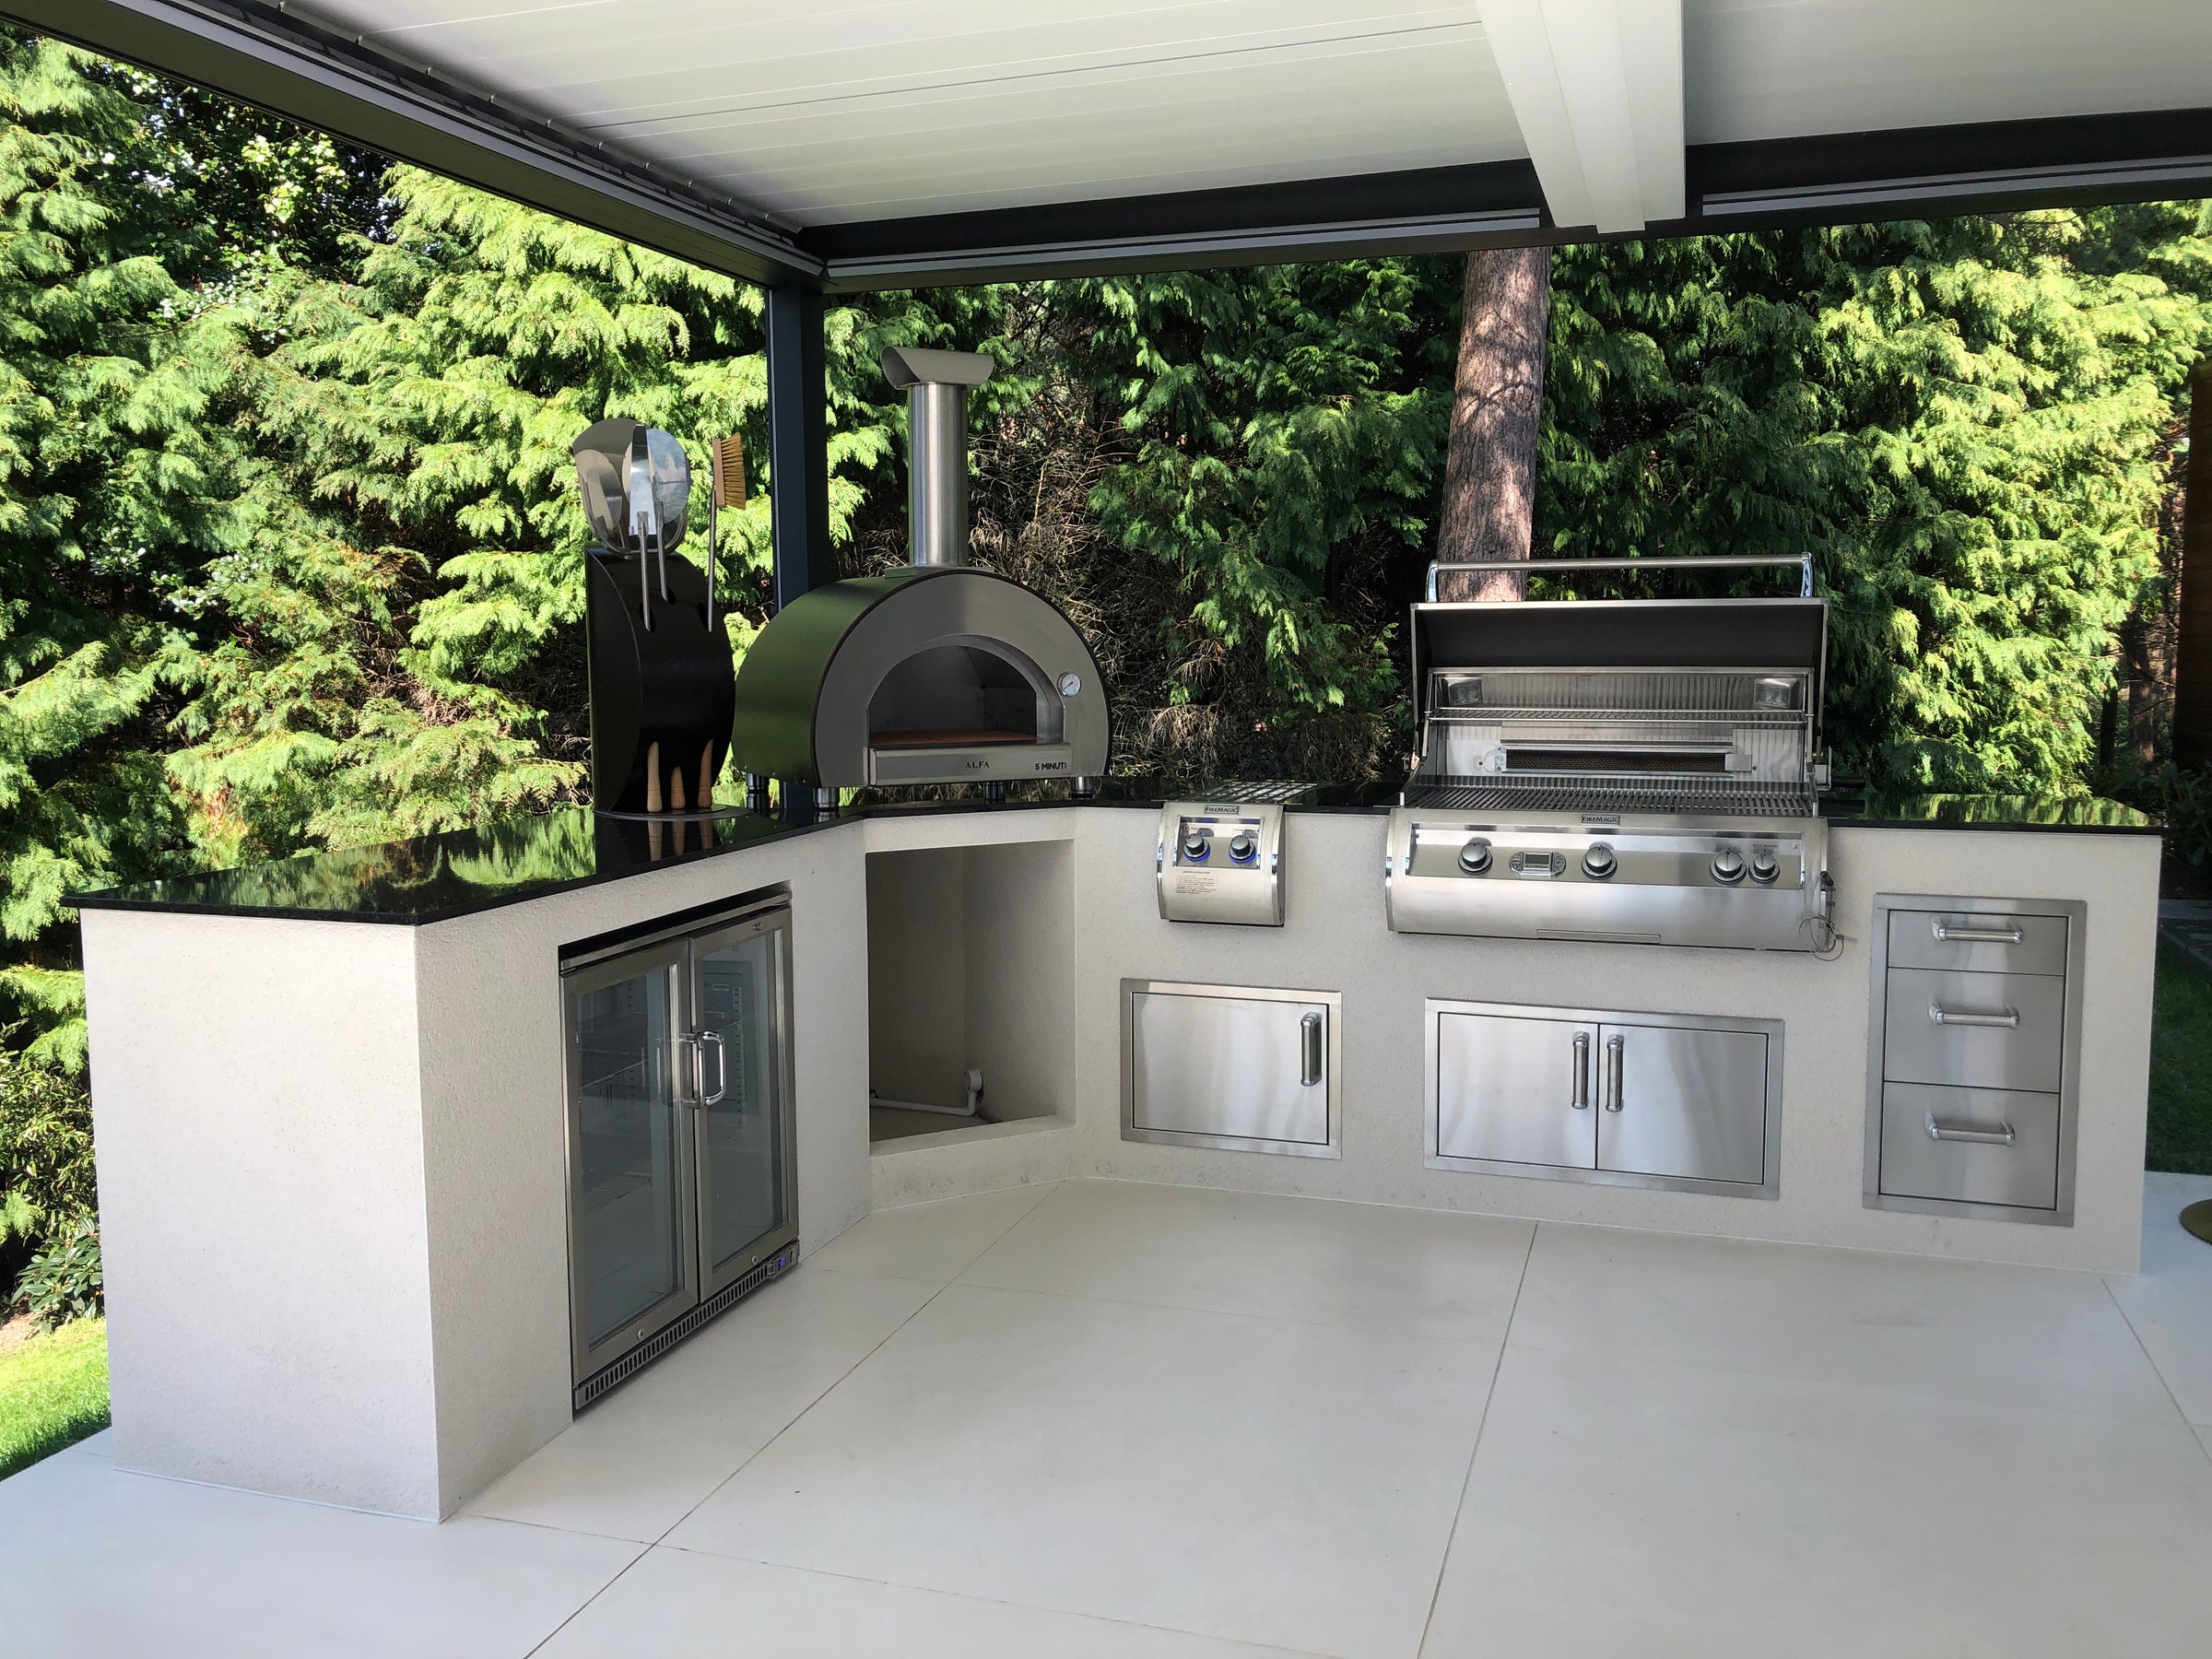 From construction to design, at AOS Kitchens we thrive on helping outdoor cooking enthusiasts through the whole process of creating their amazing outdoor kitchens. If your passion is alfresco dining, you can't beat our range of gas and charcoal bbqs, pizza ovens and outdoor kitchen units. Extend your outdoor living and entertaining space with an outdoor kitchen. Complement your outdoor living area and give yourself the ultimate dream BBQ and patio dining area.